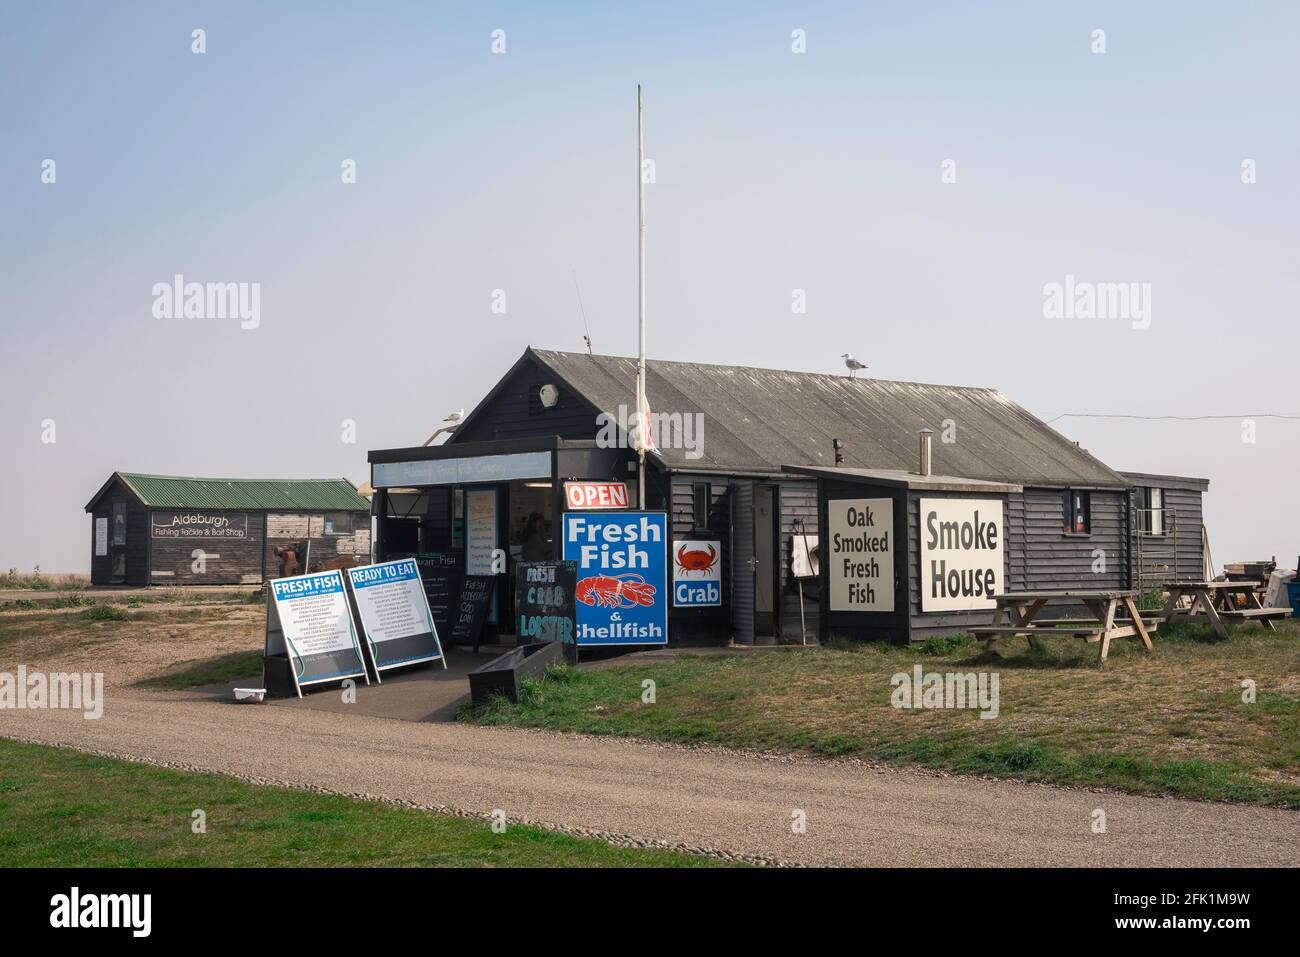 Aldeburgh Suffolk UK, view of traditional fresh fish huts selling smoked fish and shellfish sited along the beach at Aldeburgh, Suffolk, UK. Stock Photo